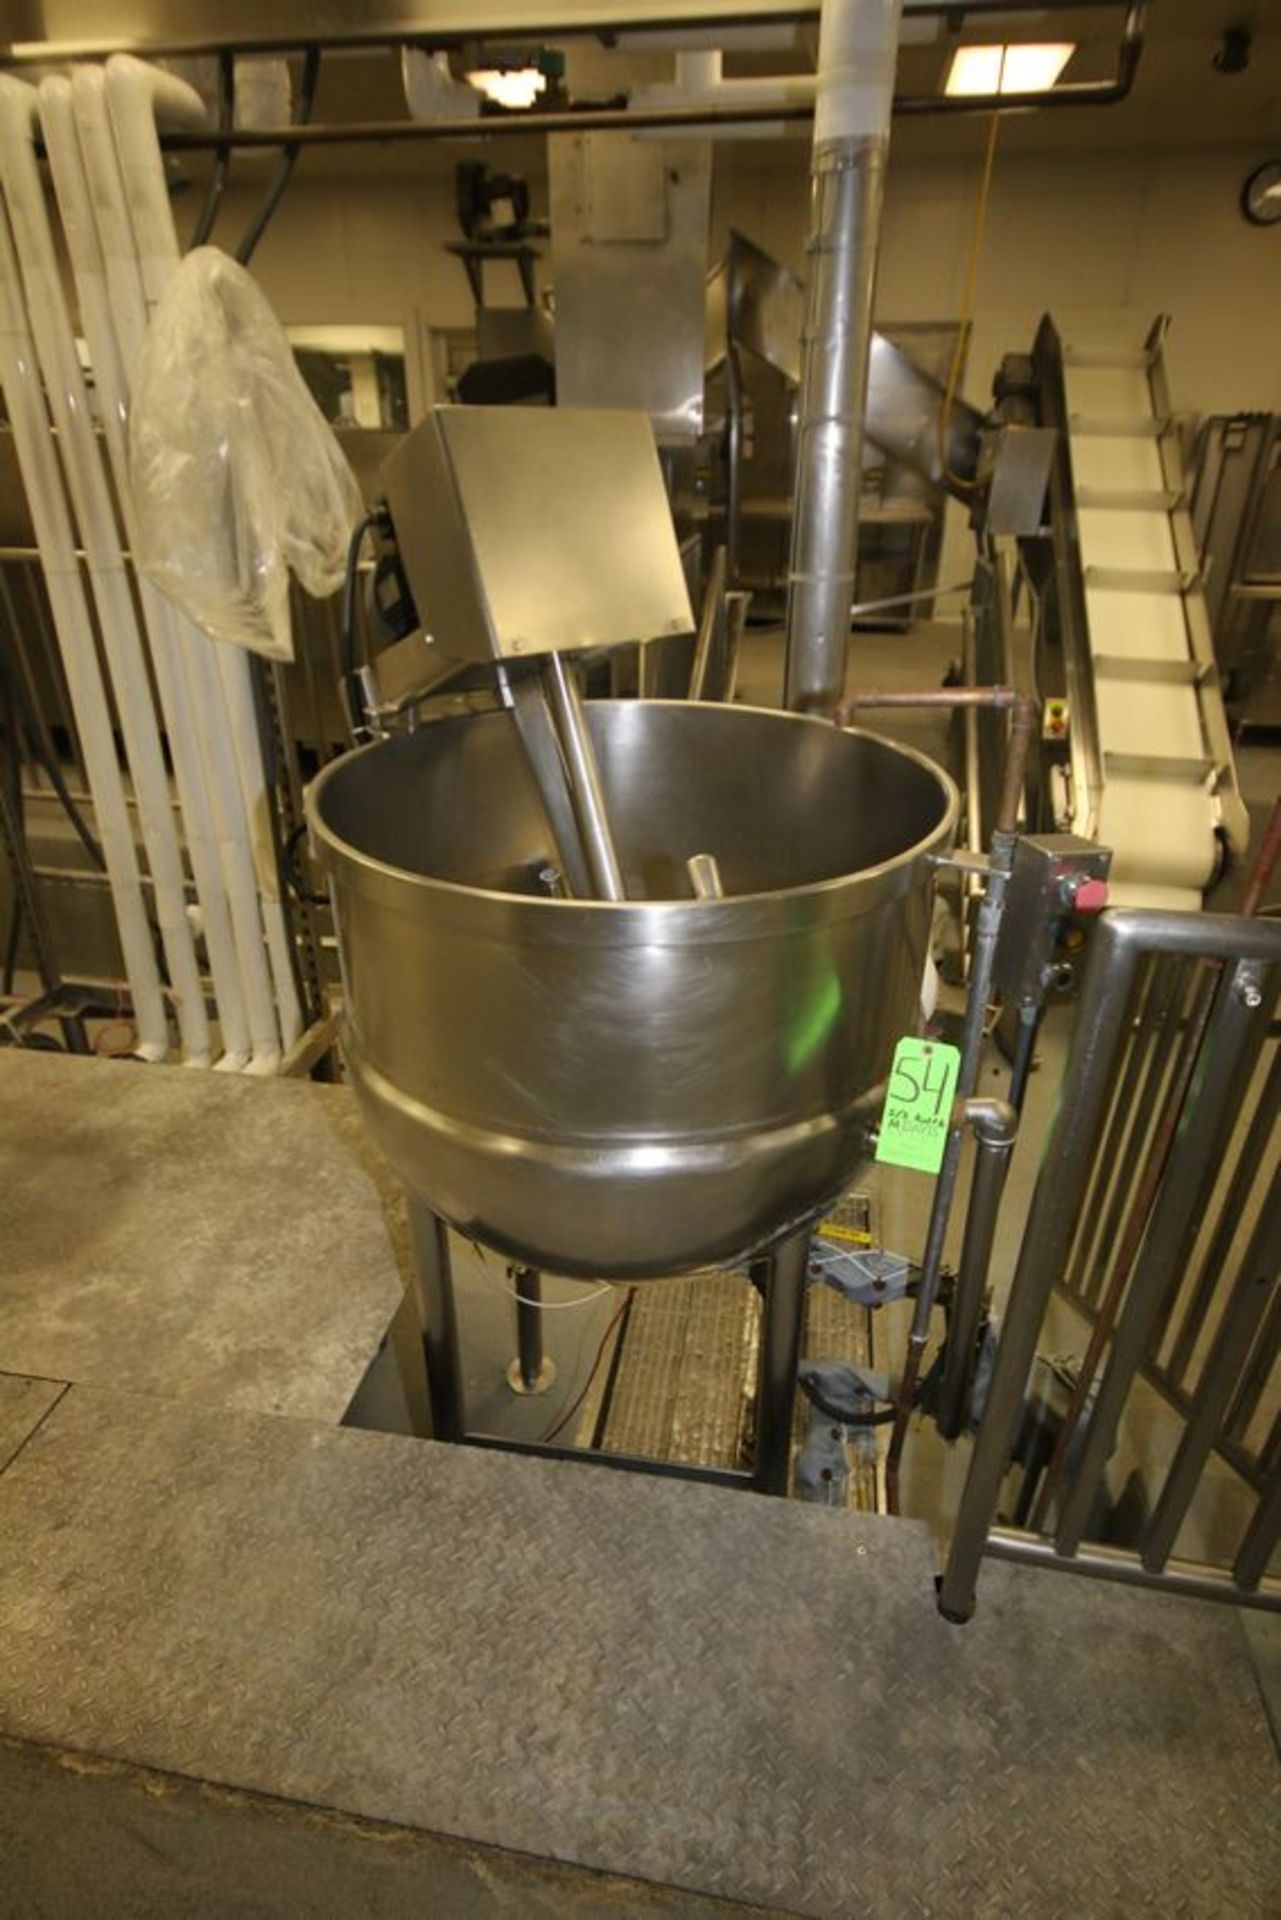 J. C. Pardo & Sons 100 Gal. S/S Kettle, S/N 8103, 100 psi @ 338 Degrees and 100 psi @ - 20 Degrees - Image 2 of 6